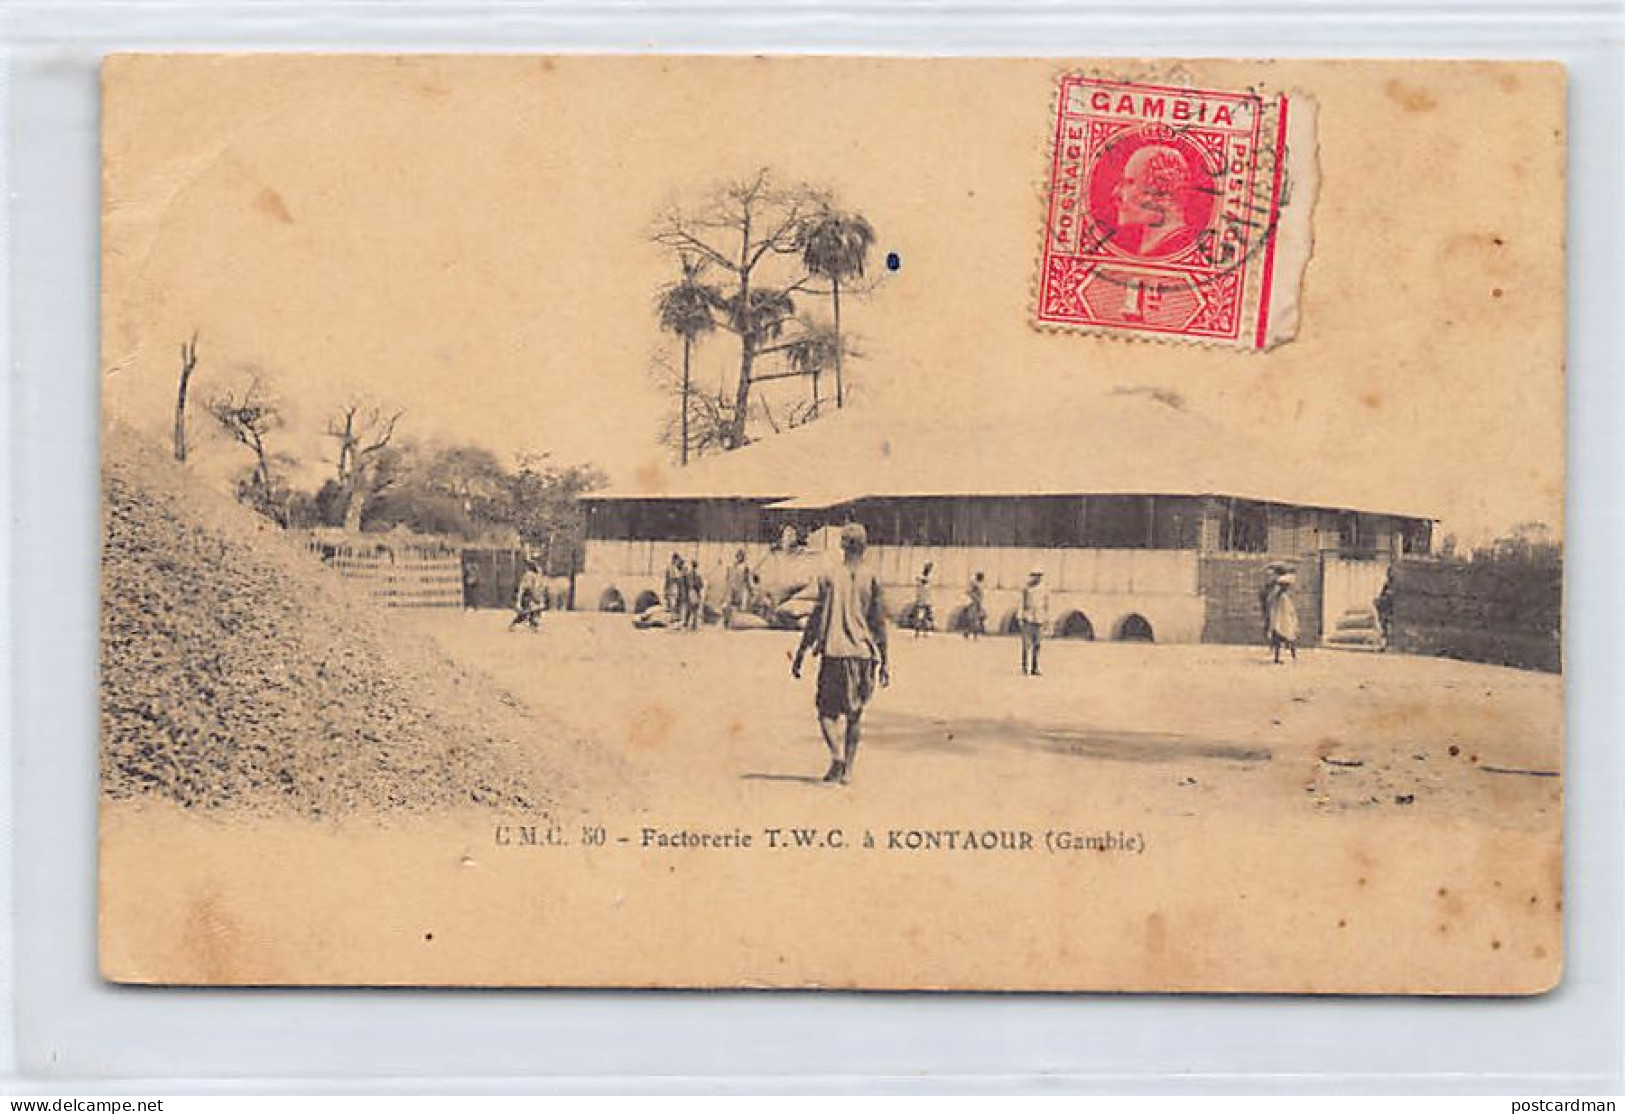 Gambia - KONTAOUR - T.W.C. Trading Post - Publ. C.M.C. 50 - Gambia